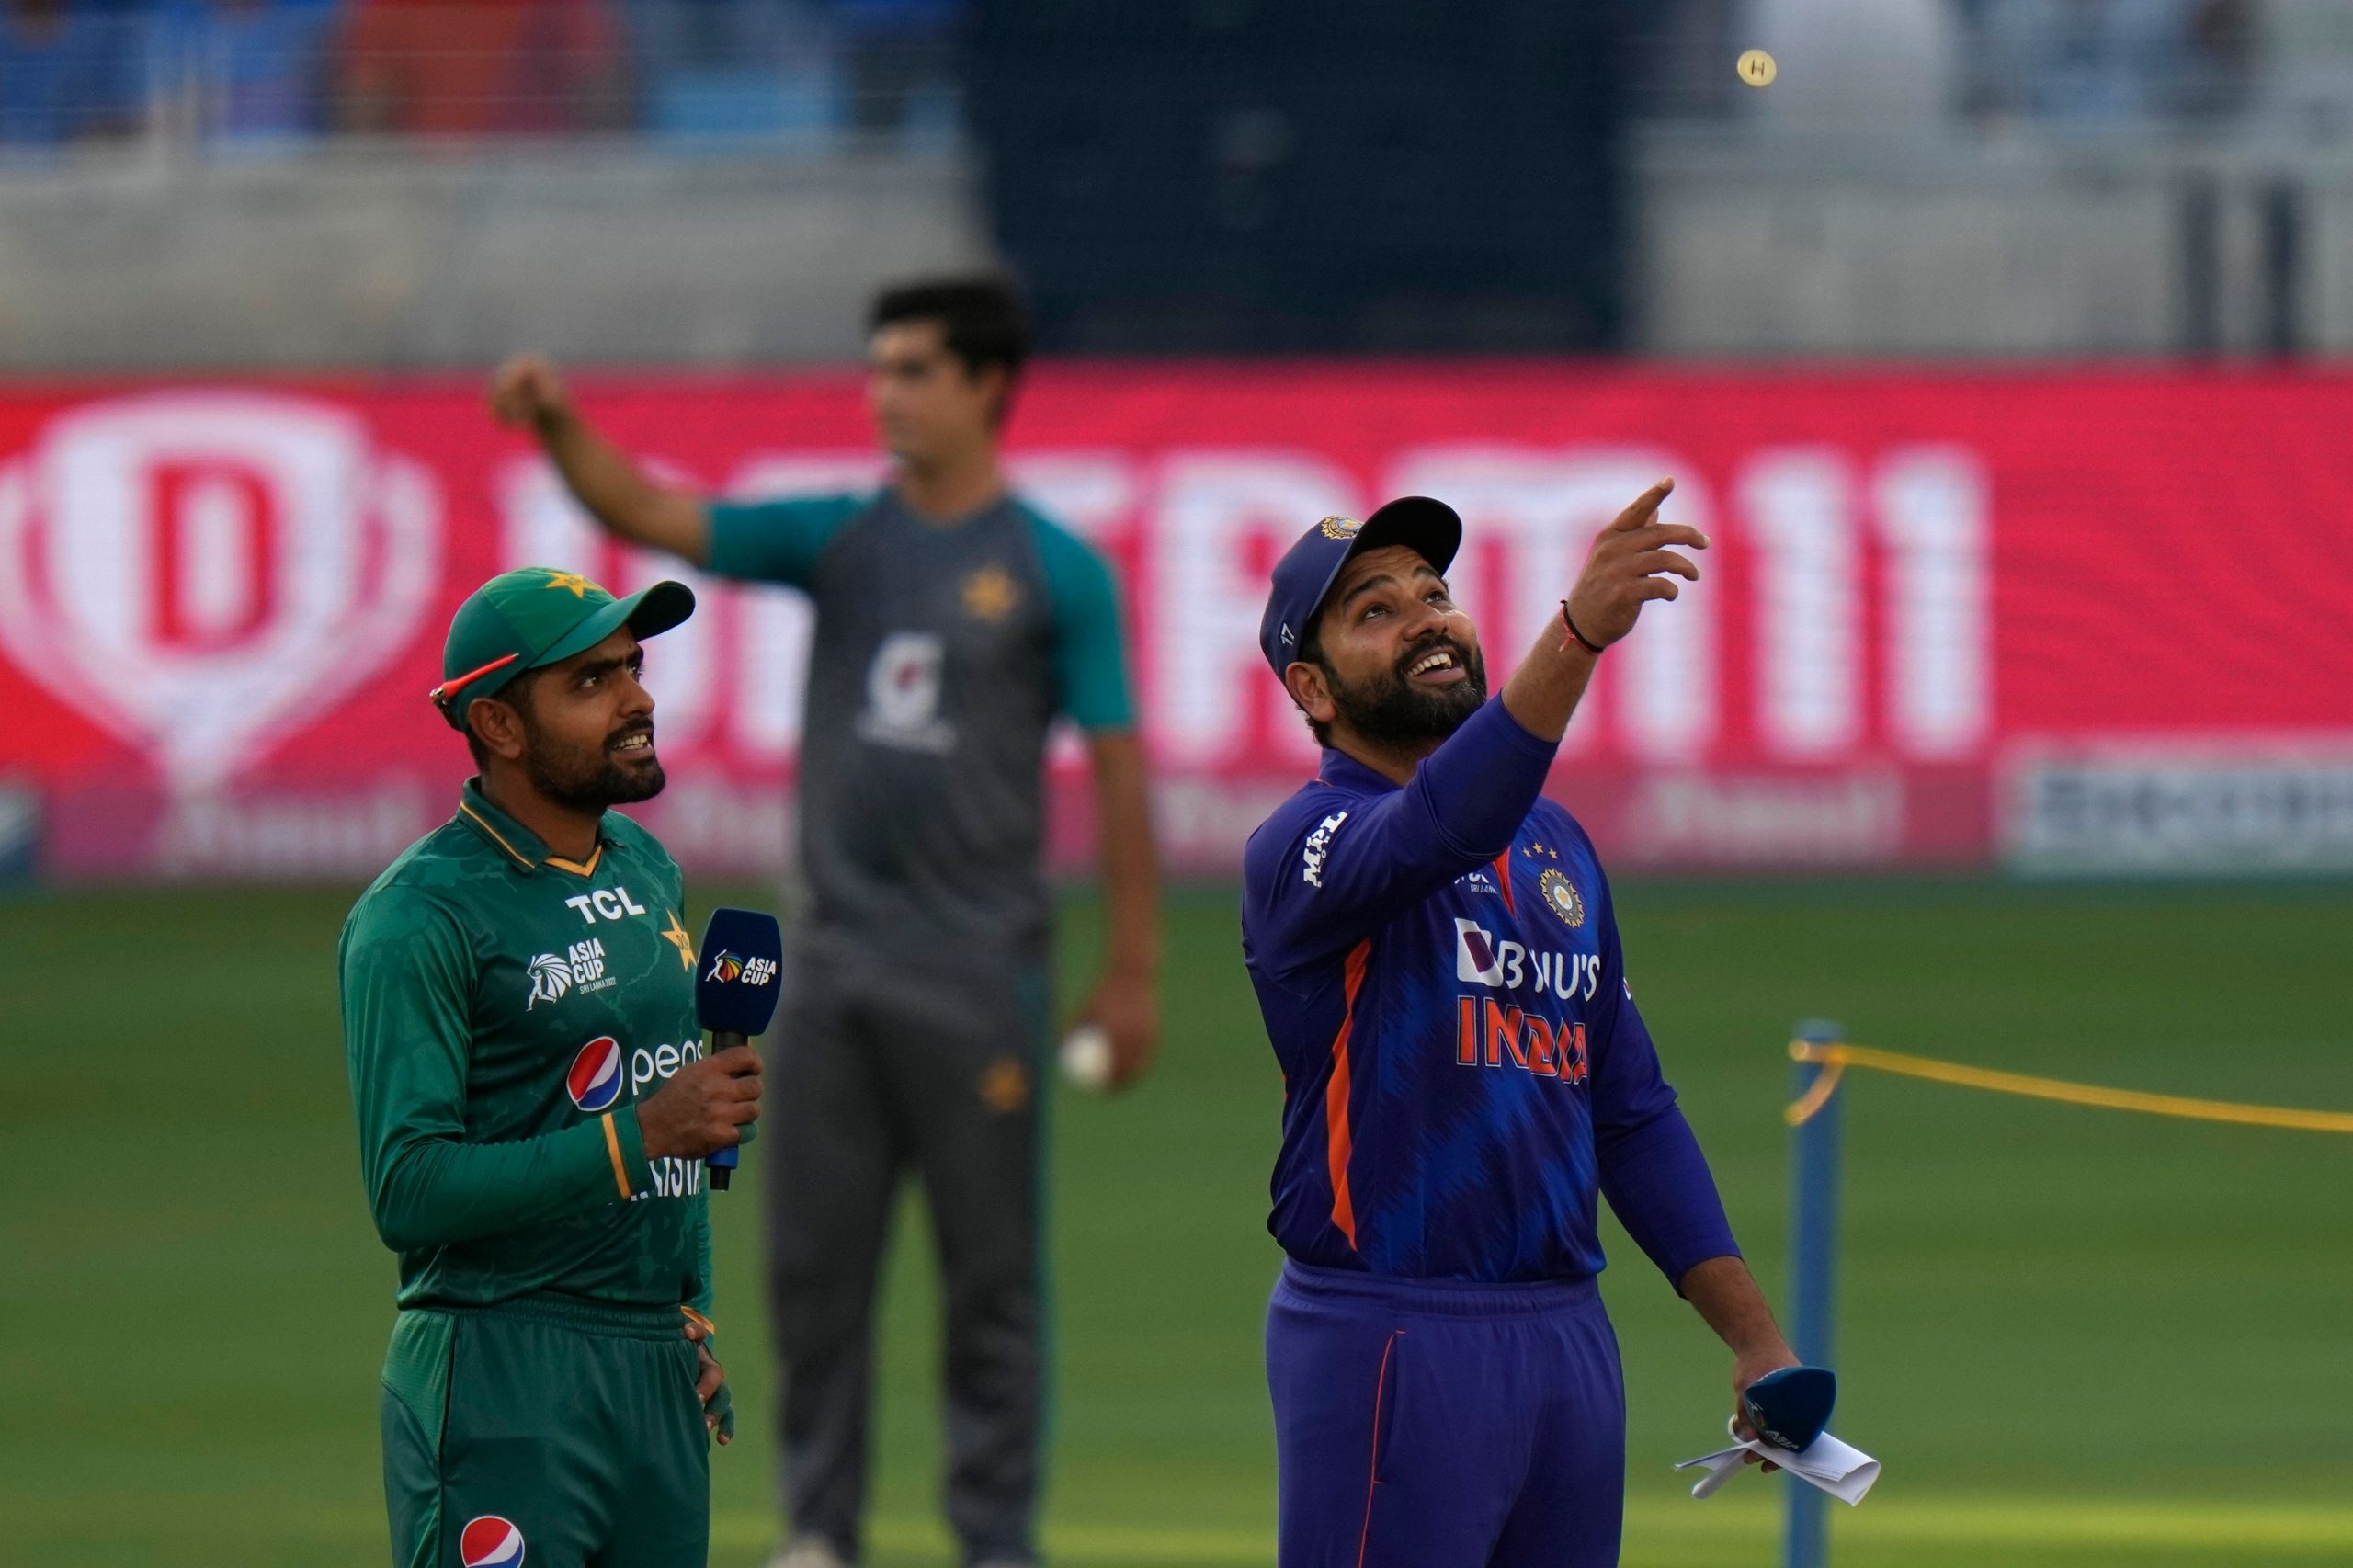 India will not travel to Pakistan for Asia Cup 2023: BCCI chief Jay Shah